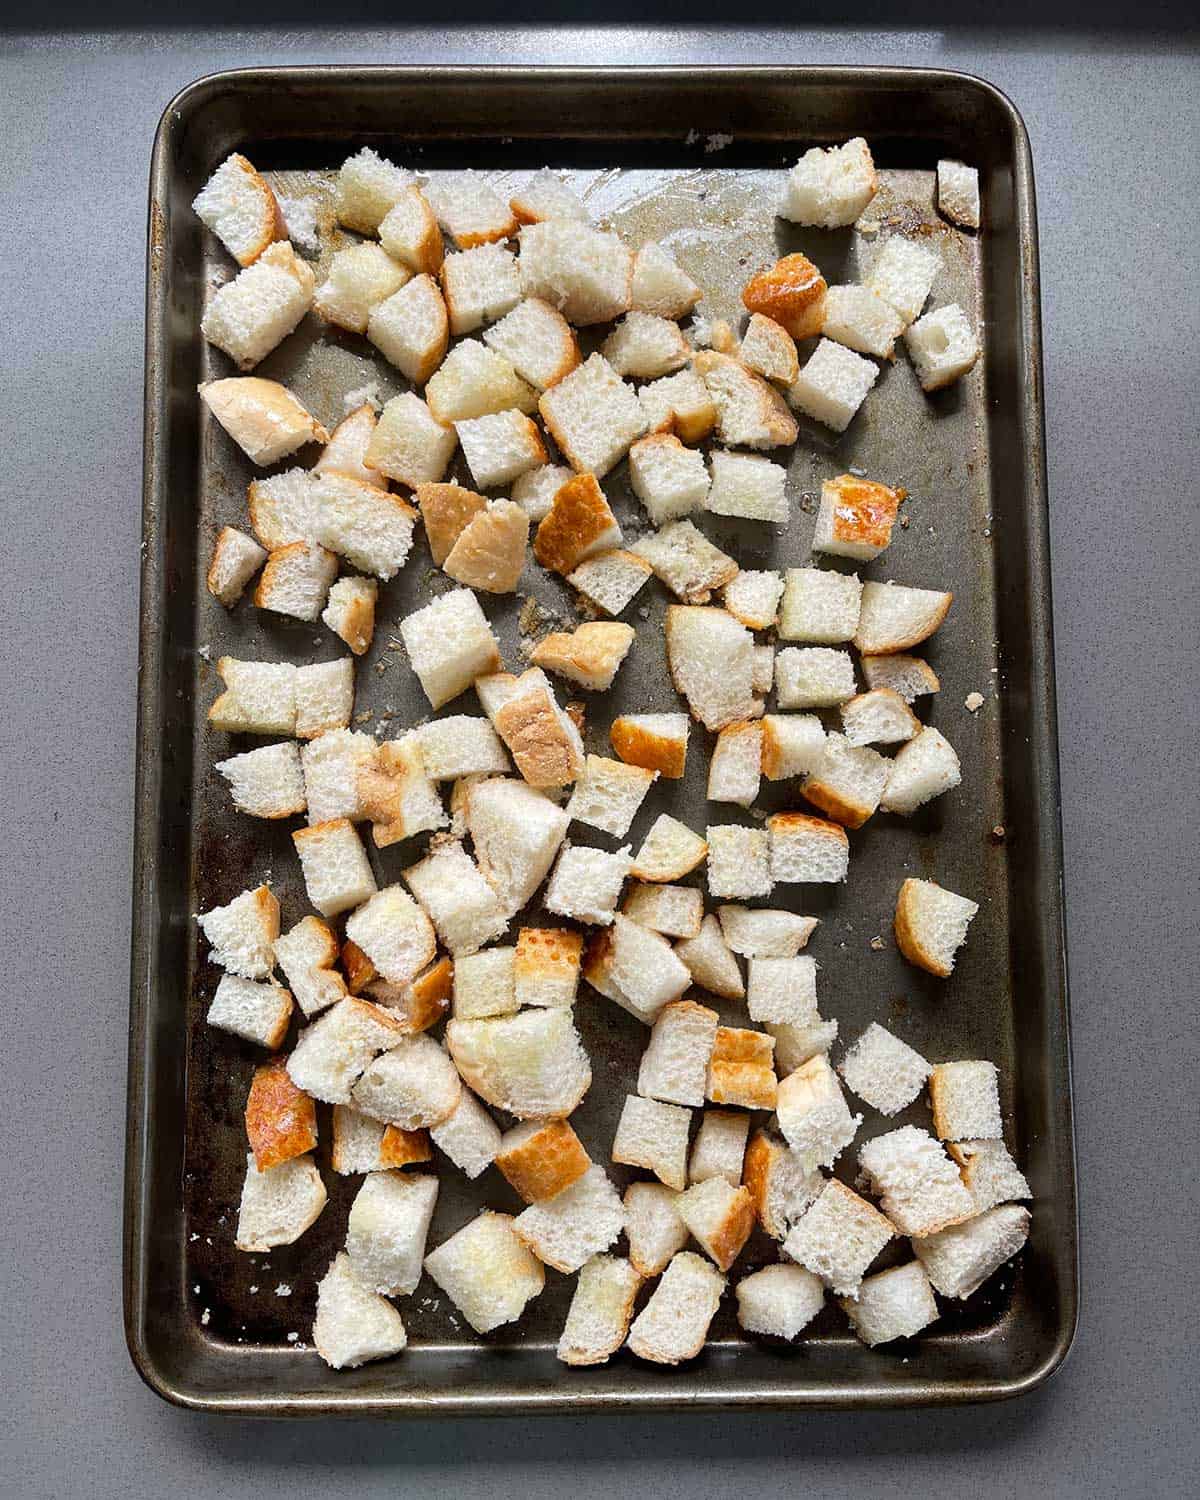 Small pieces of bread cut up on an oven tray.